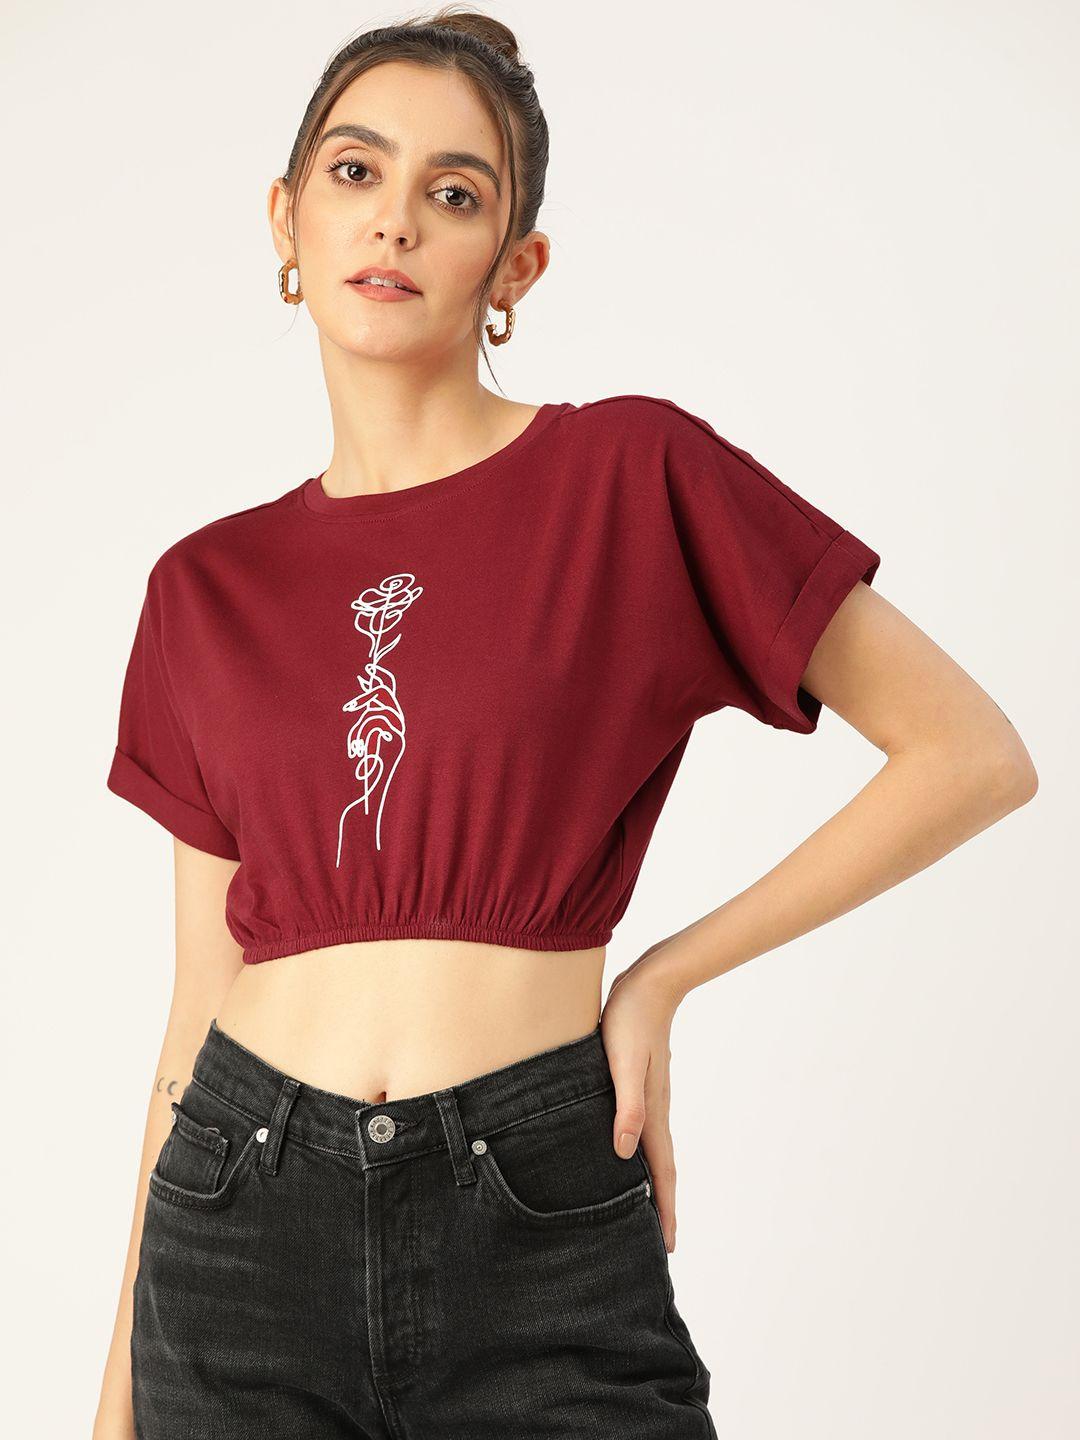 rue collection maroon printed extended sleeves blouson crop top